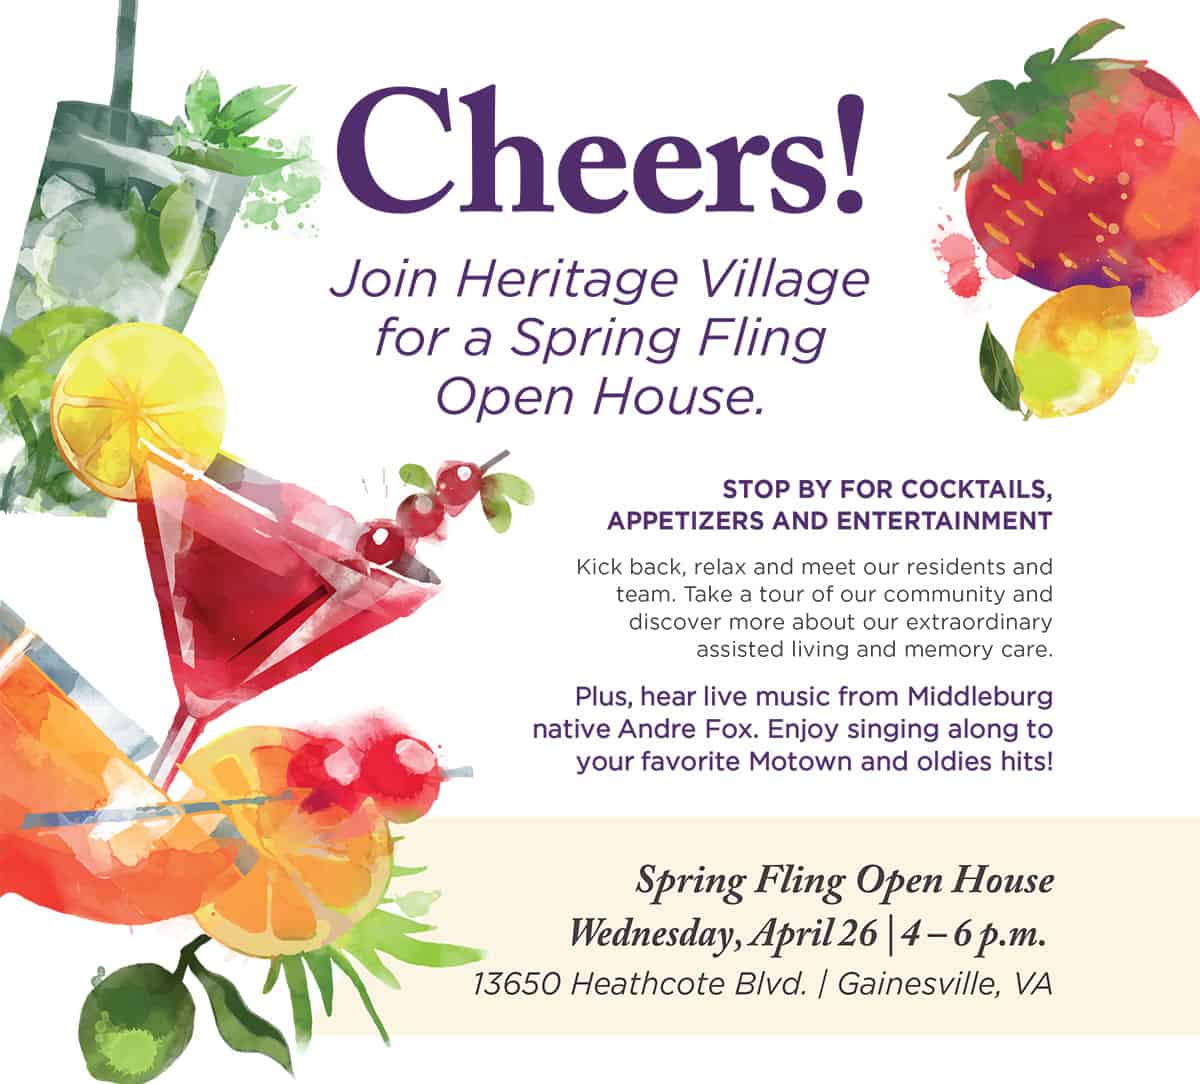 Spring Fling Open House at Heritage Village with cocktails and live music on April 26, 4-6 p.m.